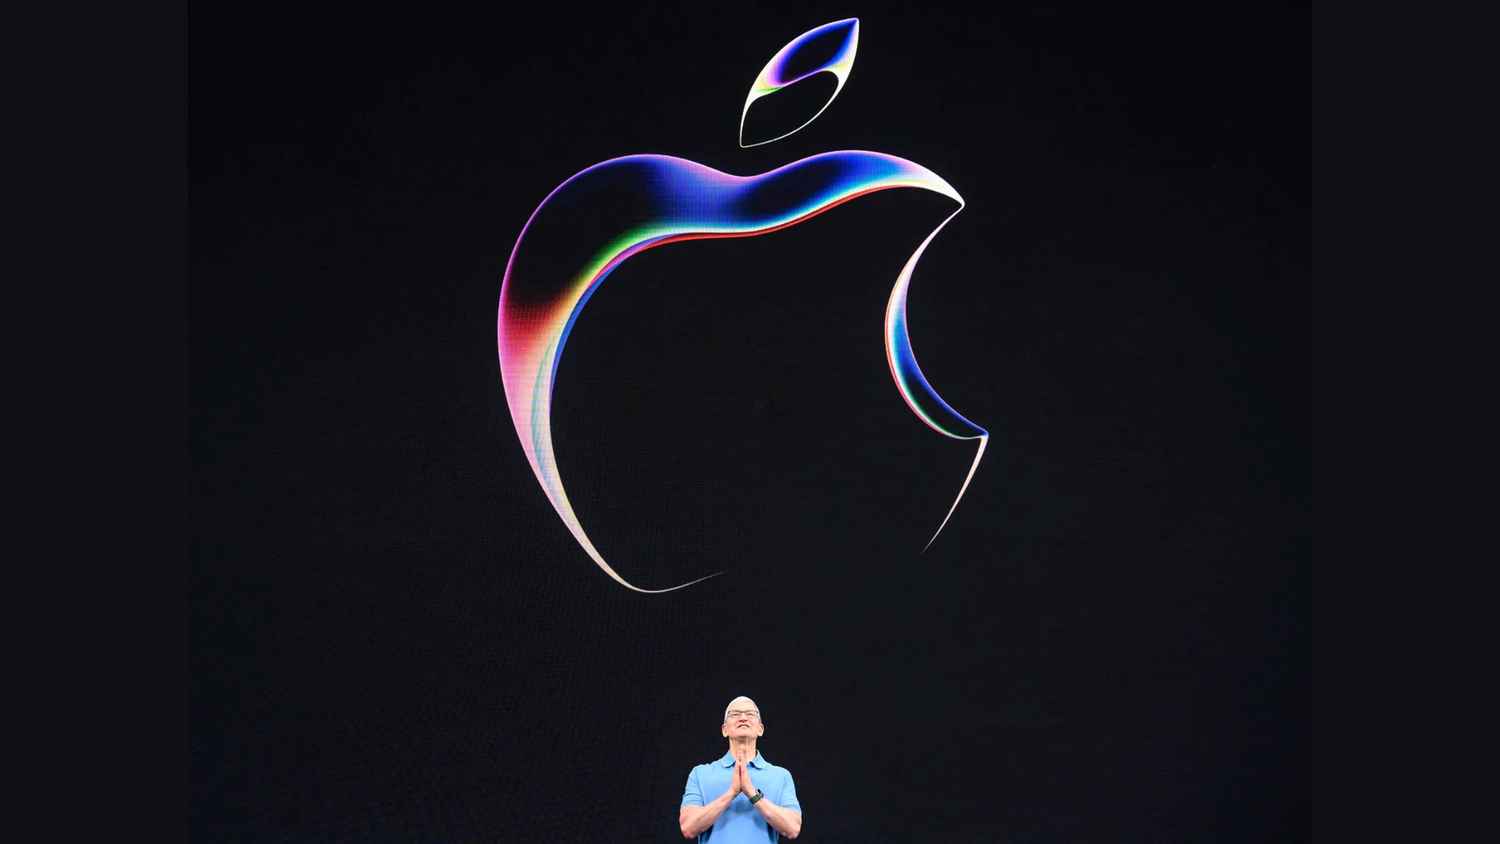 WWDC 2023: Twitter Erupts With Hilarious Memes As Apple Unveils